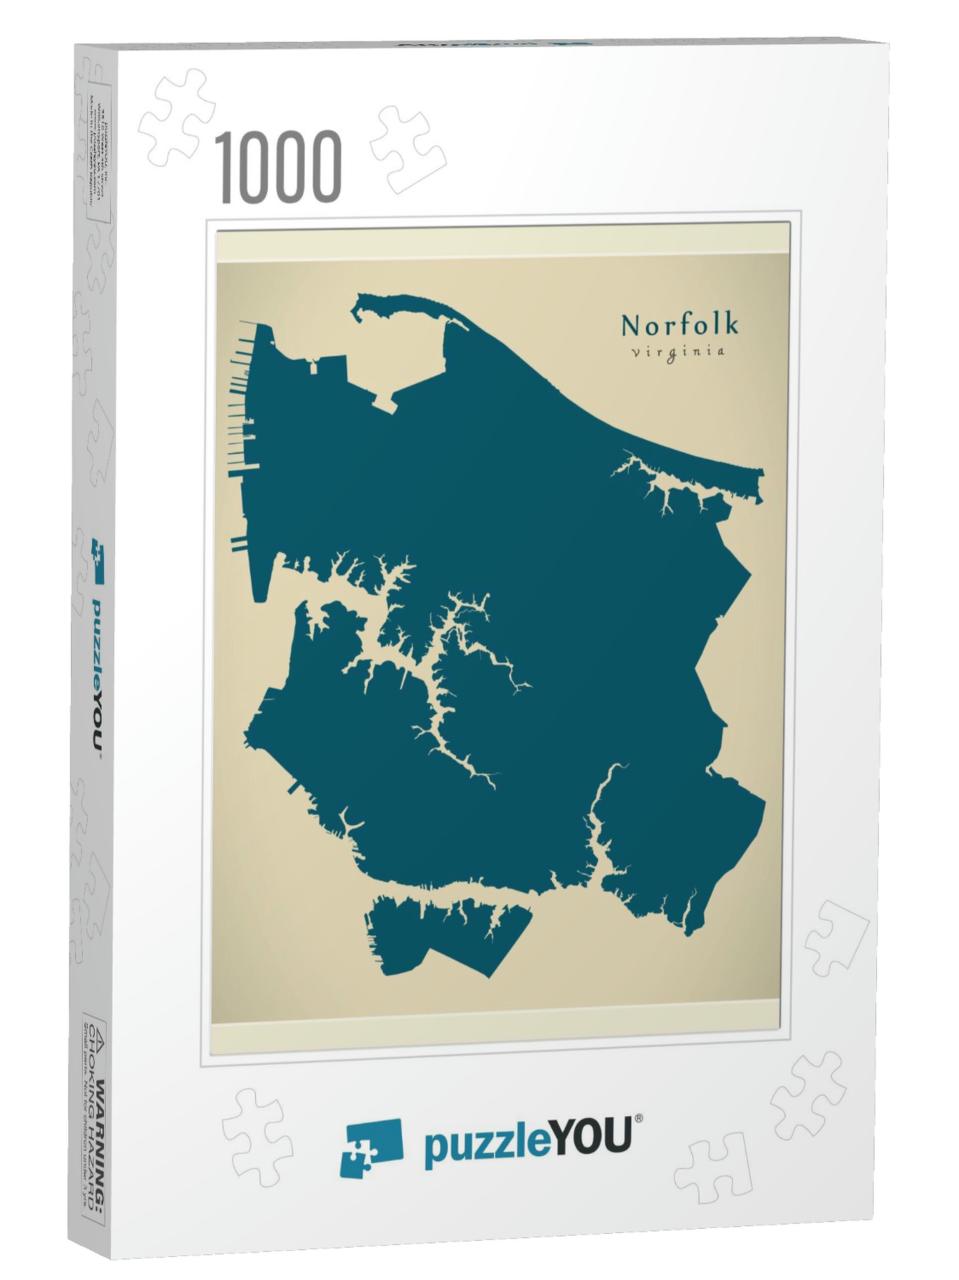 Modern City Map - Norfolk Virginia City of the Usa... Jigsaw Puzzle with 1000 pieces